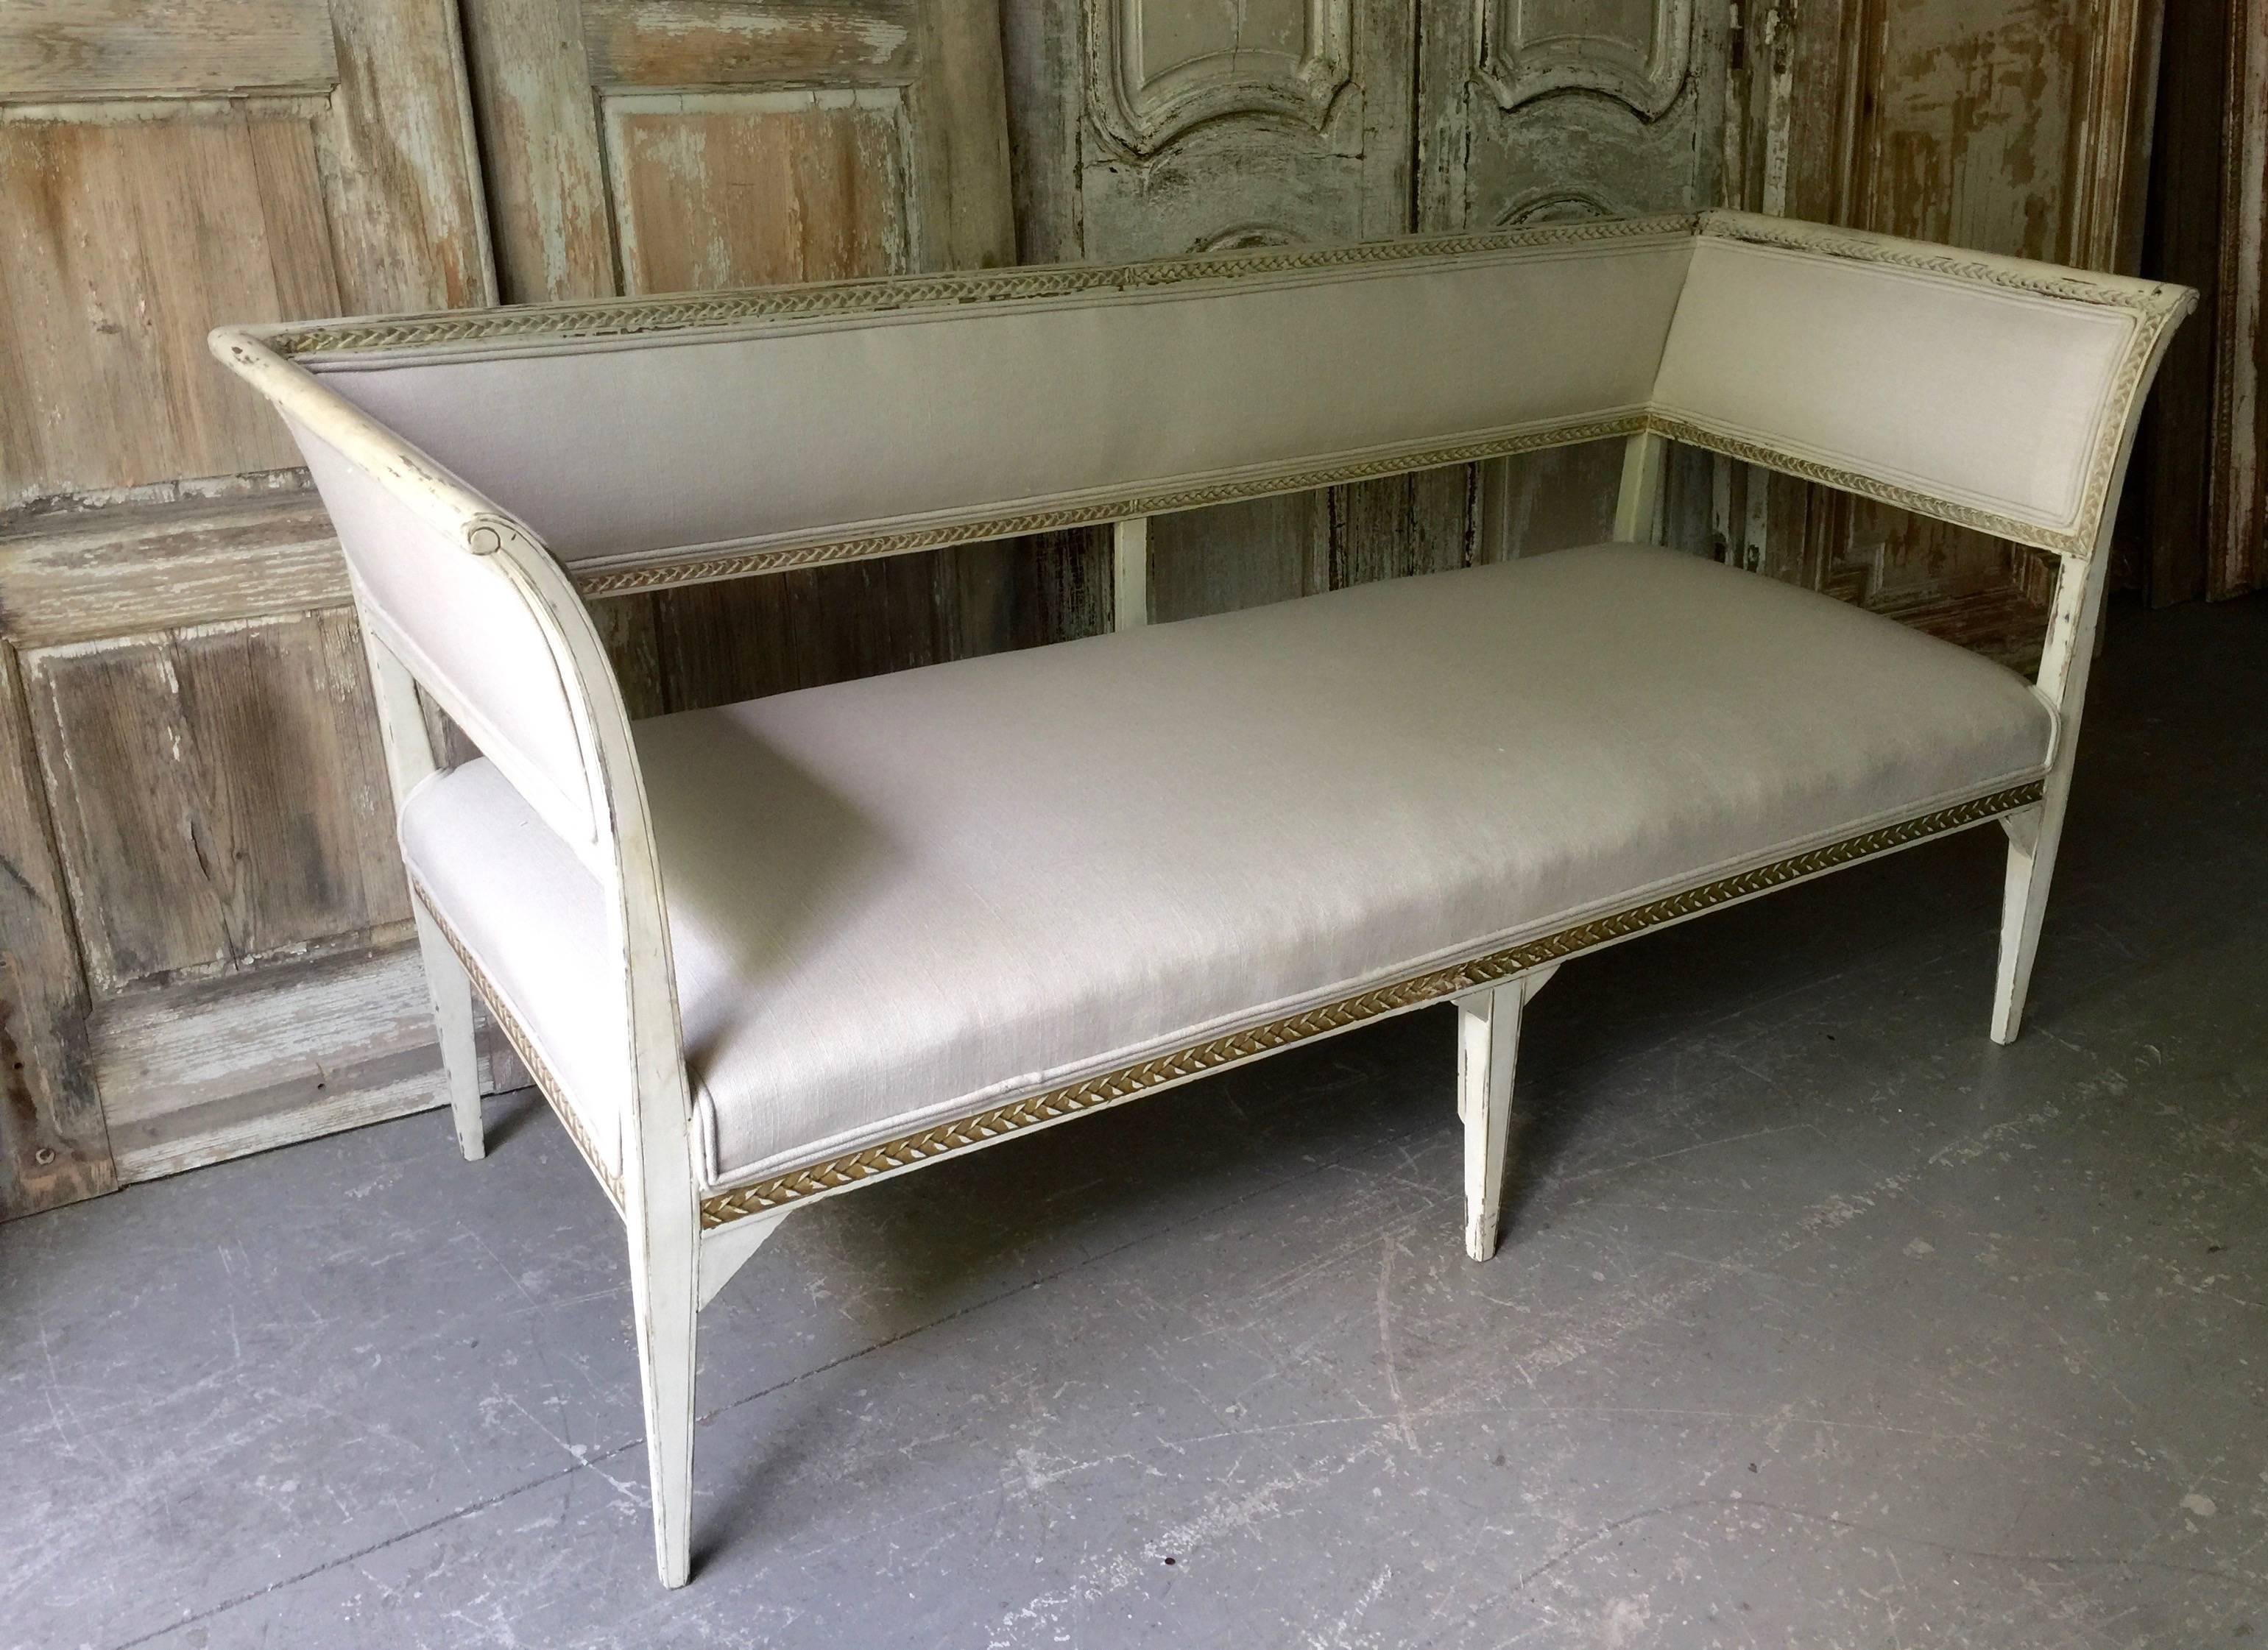 Late 19th century Swedish Gustavian style sofa with richly carved backrest and sides with traces of gold gilt accents. Reupholstered in hint of palest gray tone linen. 
Seat size: 55